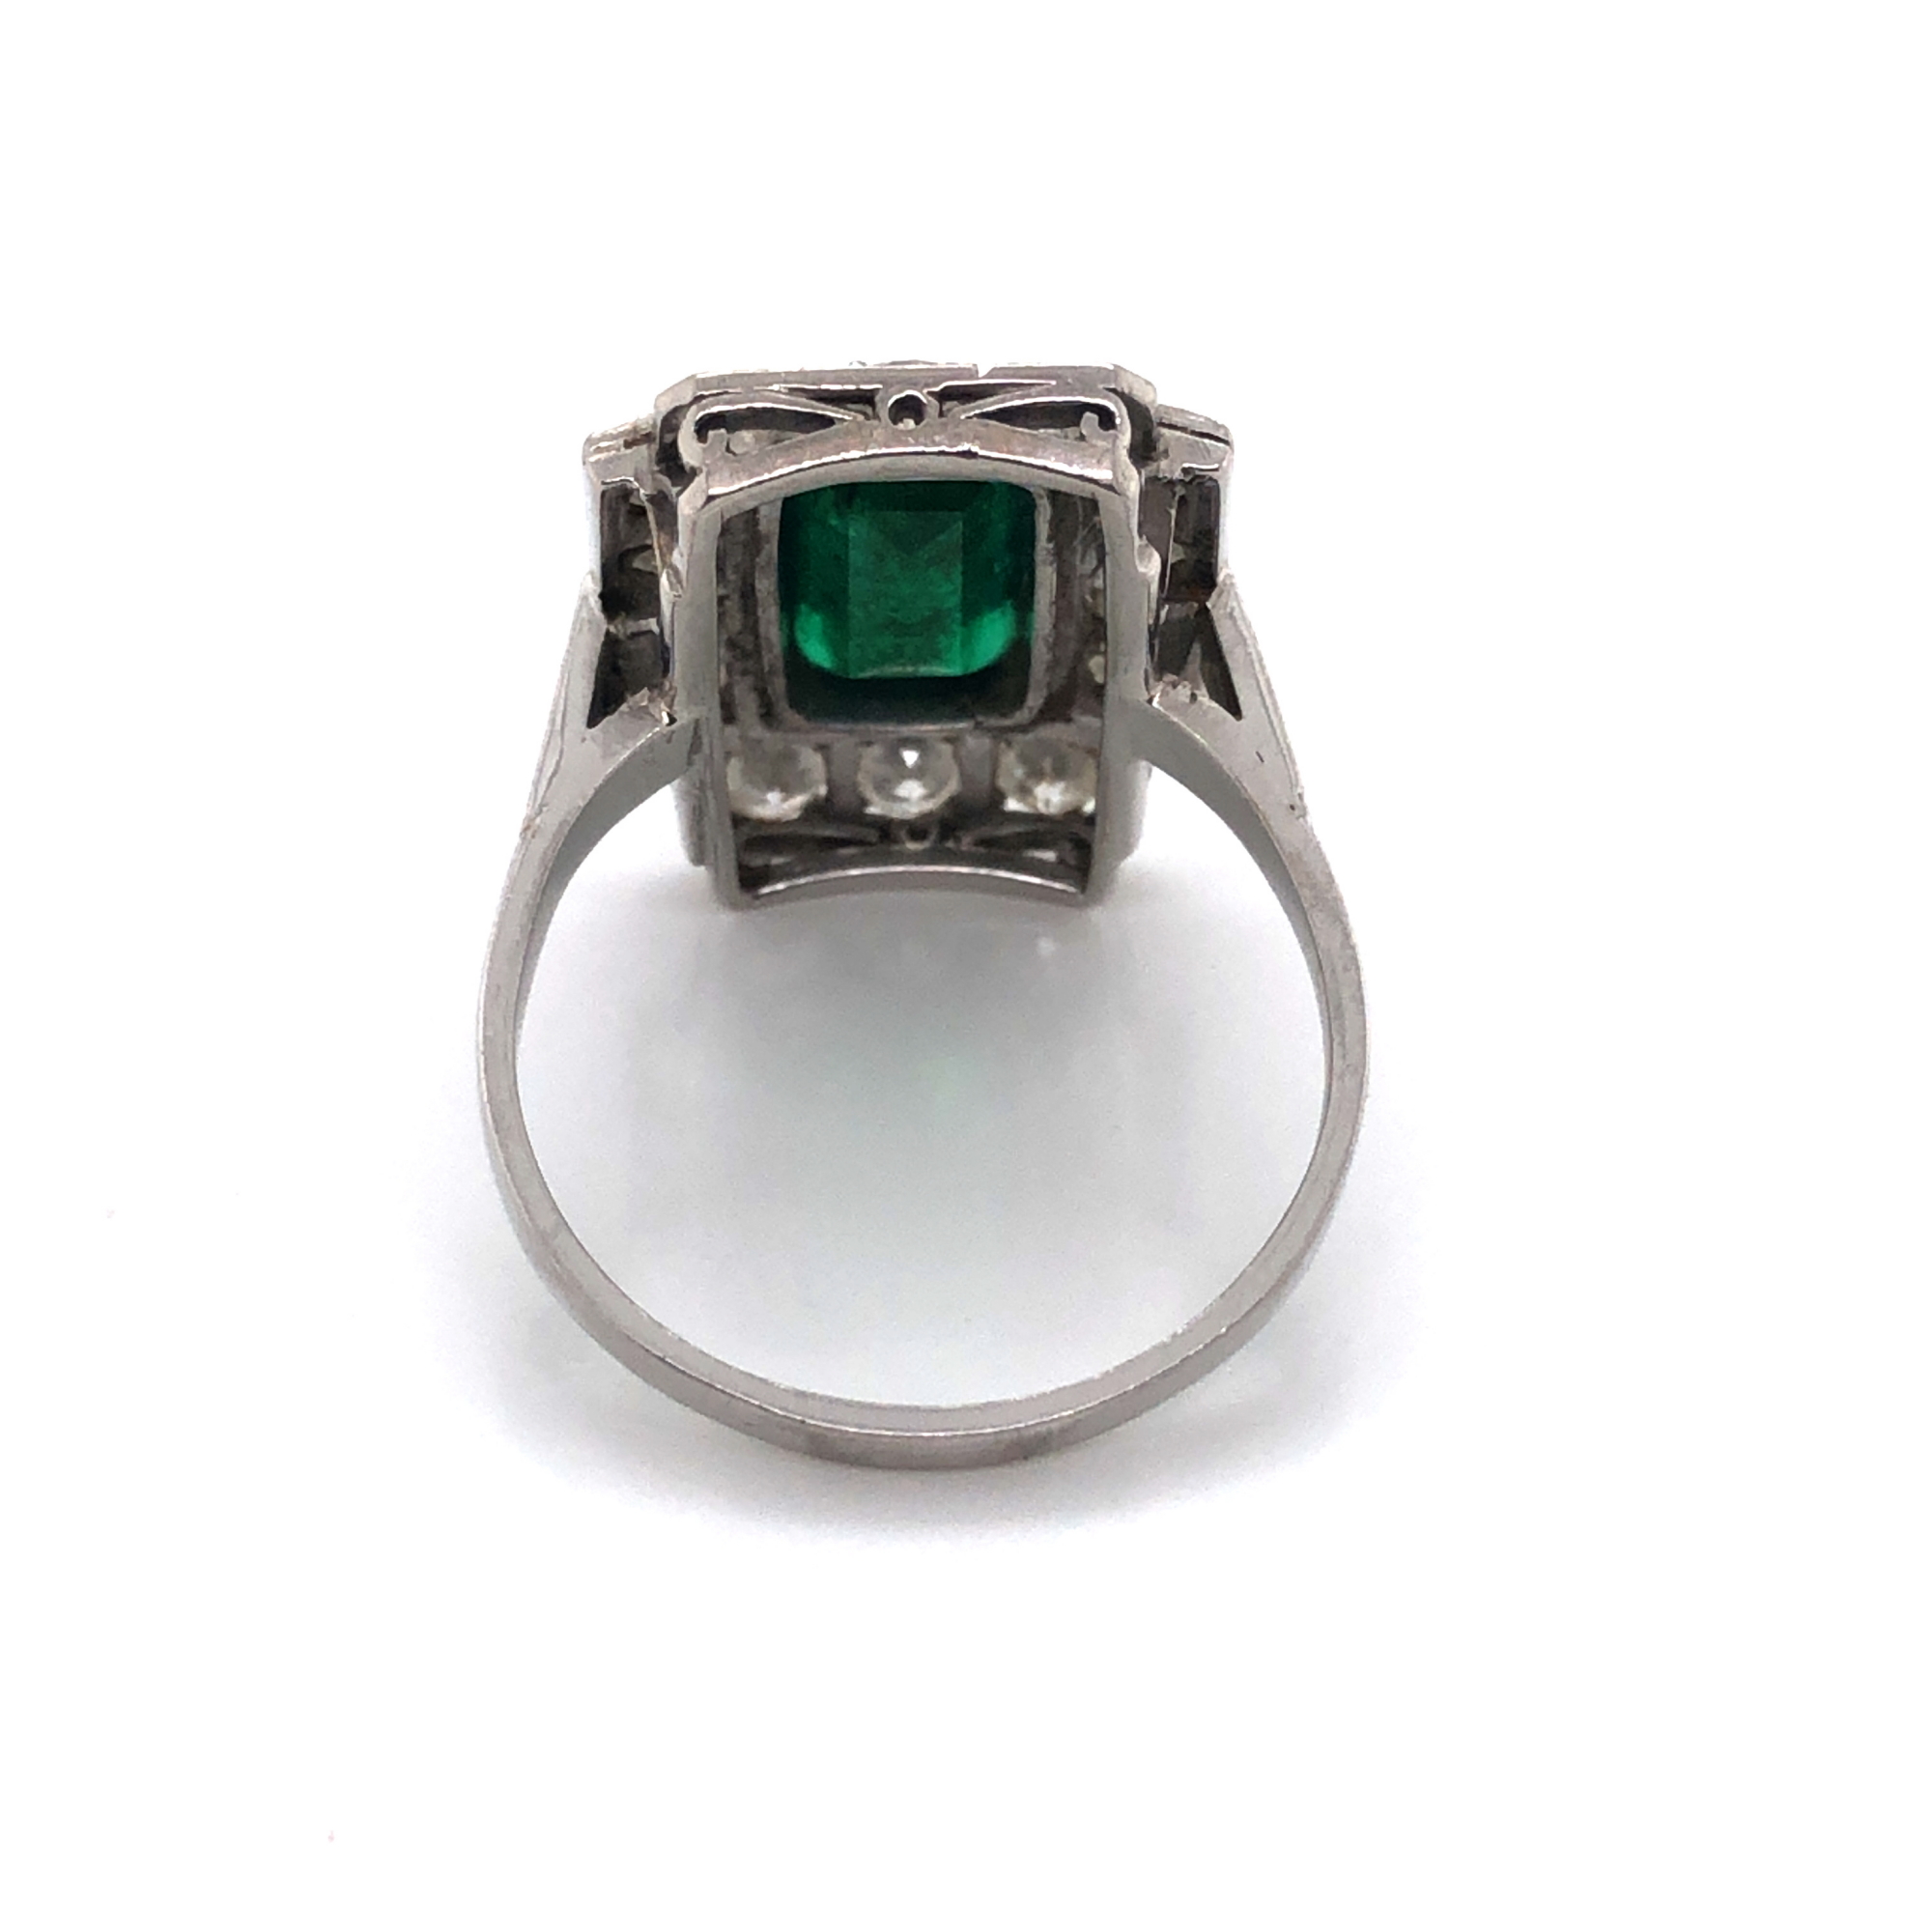 AN ART DECO EMERALD AND DIAMOND PANEL RING. THE LOZENGE SHAPE EMERALD APPROX 11 X 6mm, SURROUNDED BY - Image 5 of 10